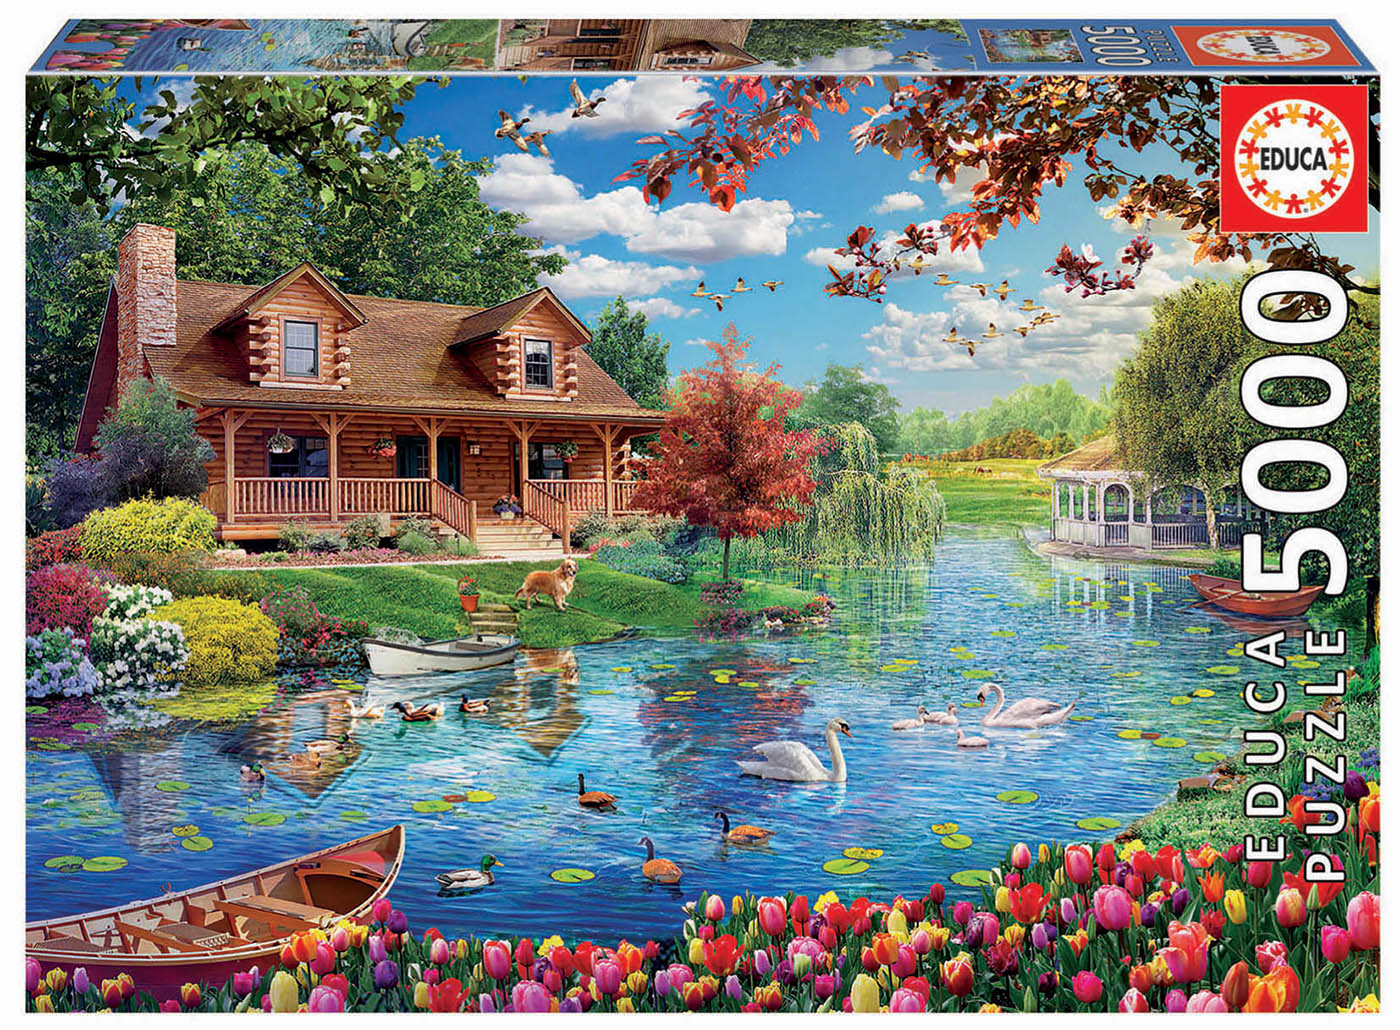 5000 Piece Adult Puzzle Puzzles for Adults 5000 Piece Every Piece is Unique Art Paintings